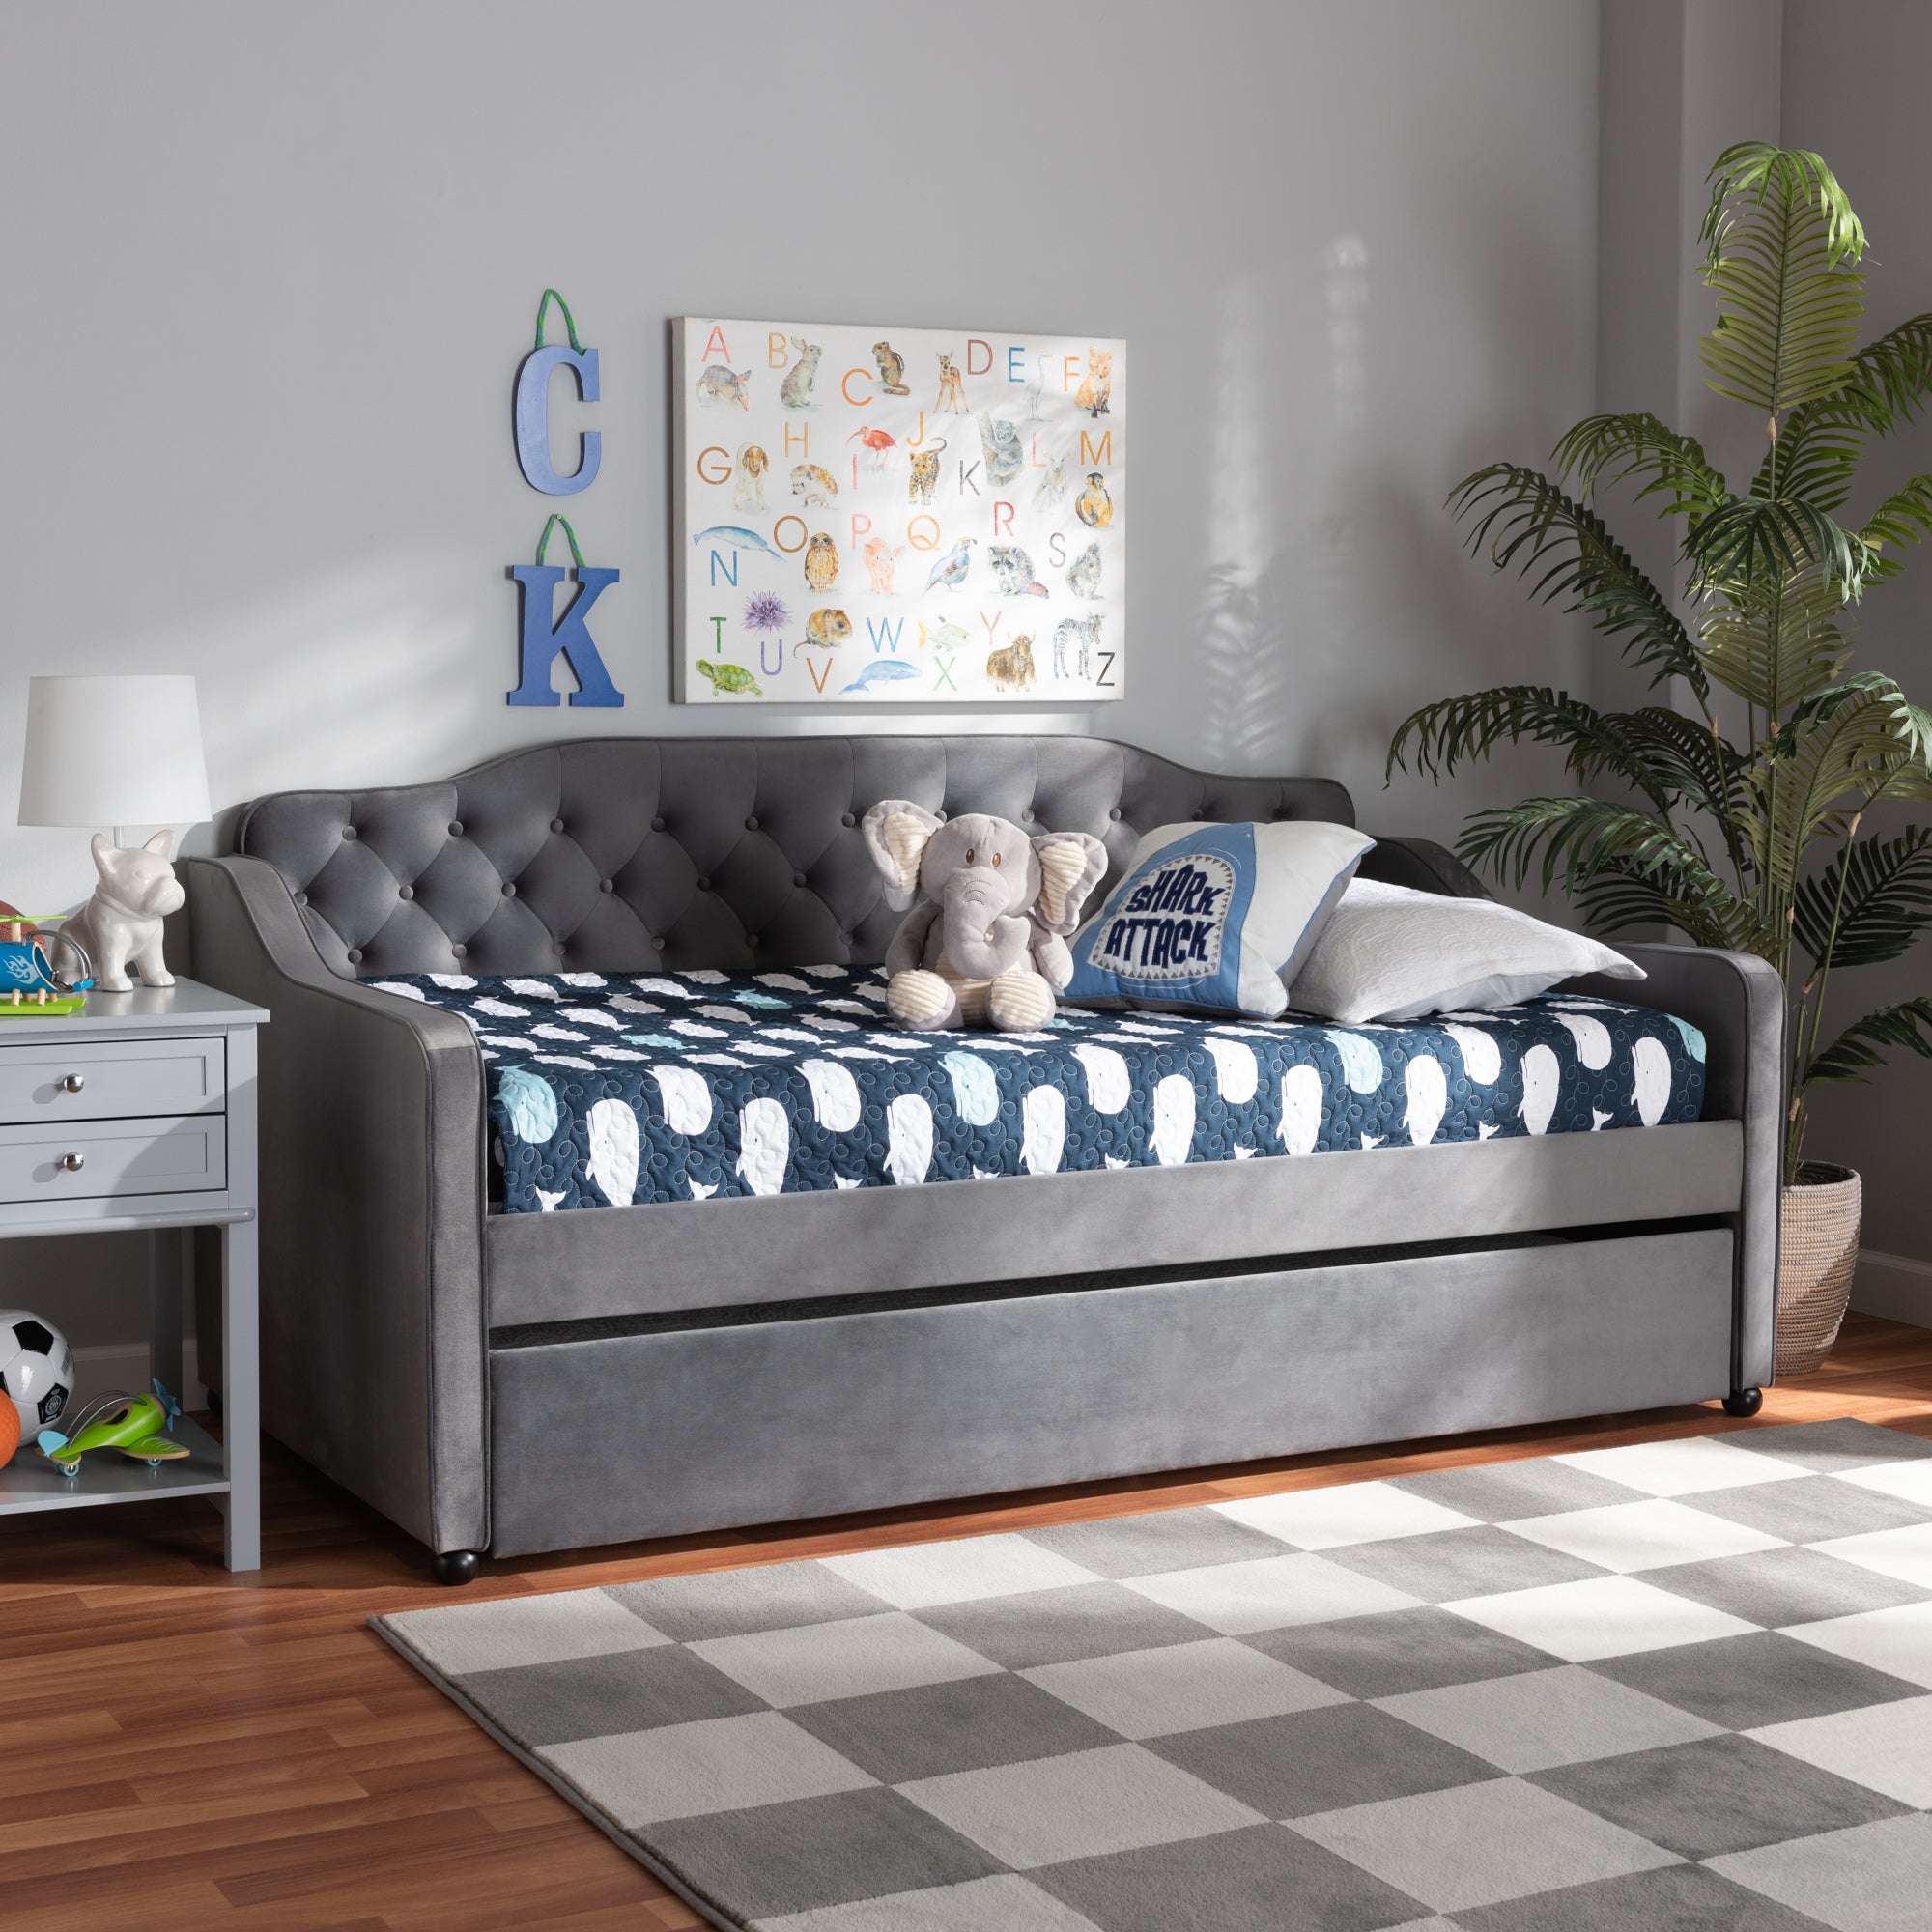 Freda Traditional Daybed with Trundle-Daybed & Trundle-Baxton Studio - WI-Wall2Wall Furnishings